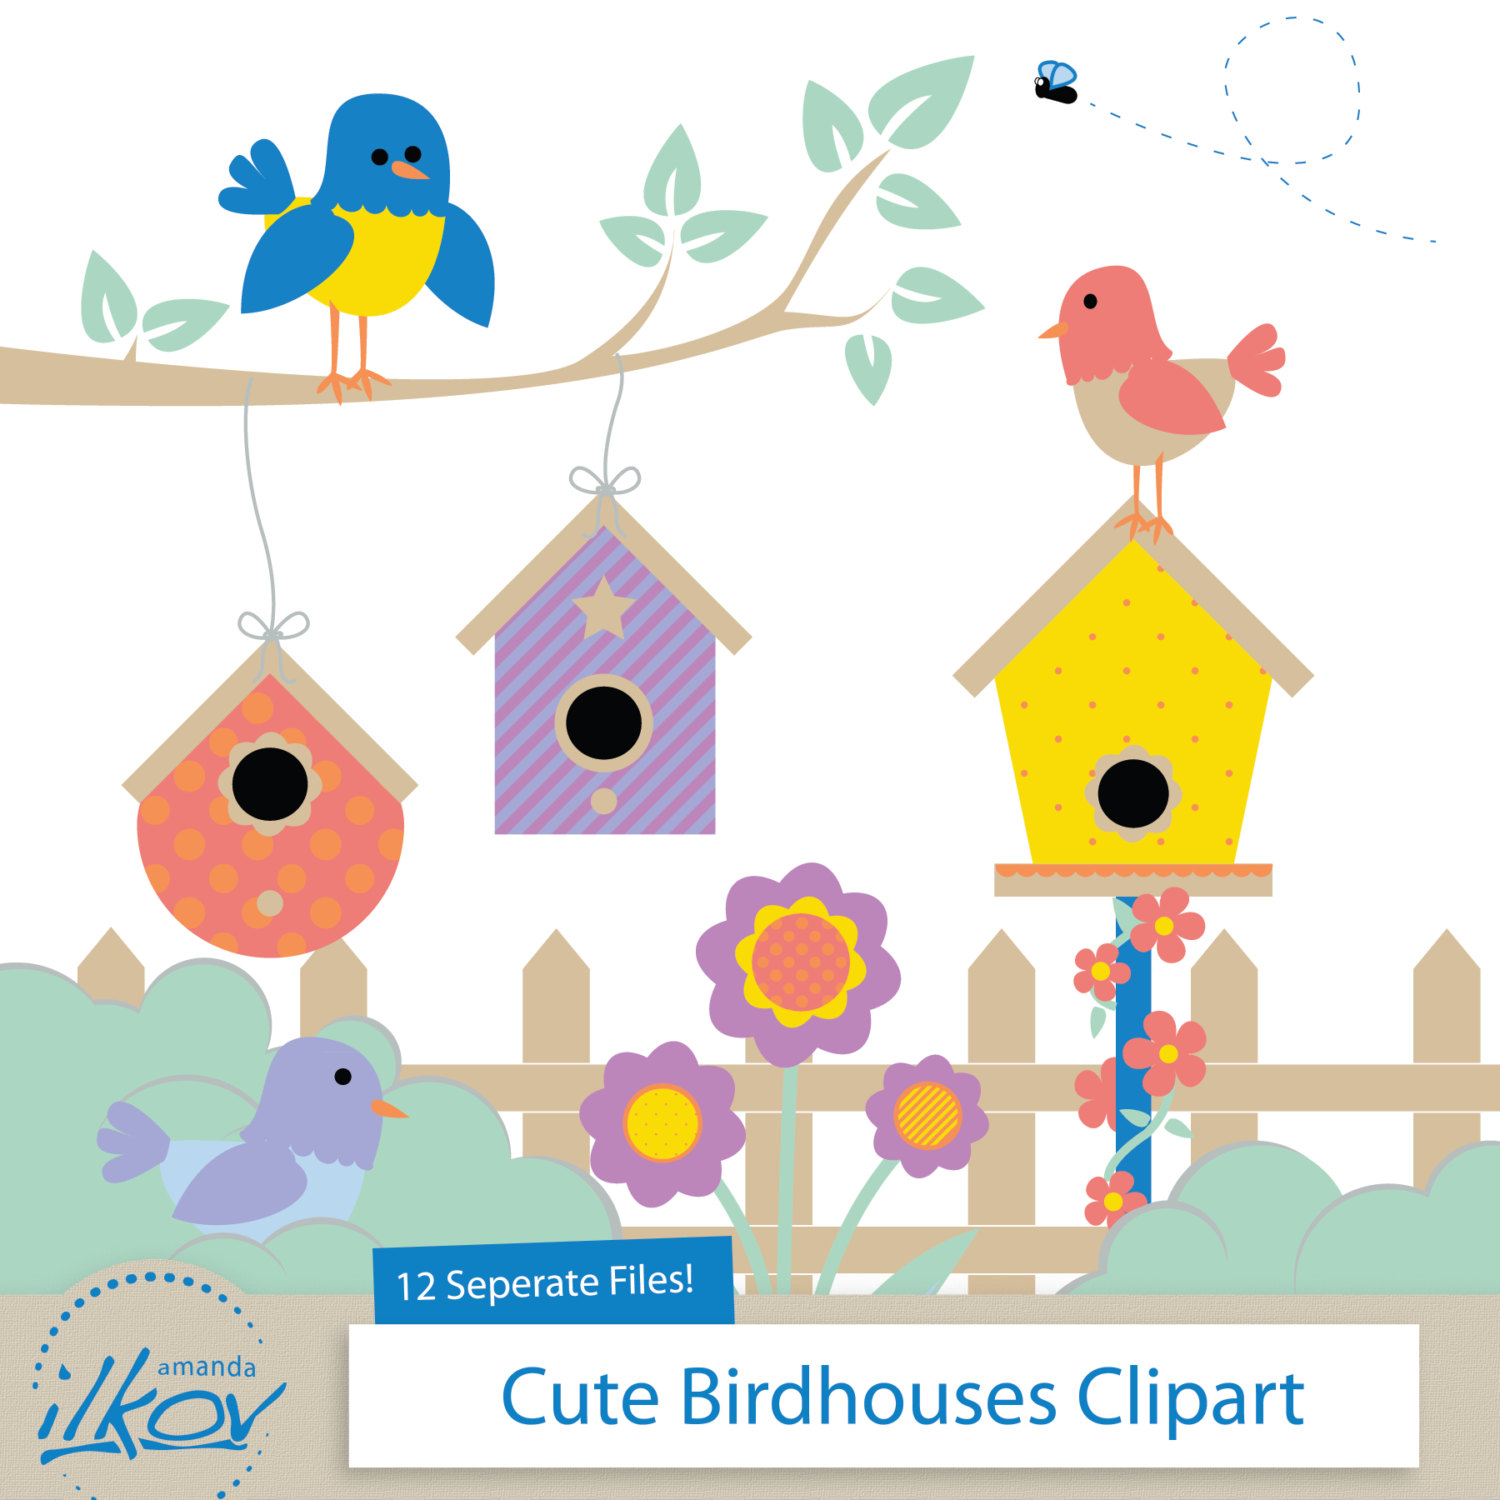 ... Abstract birdhouse set wi